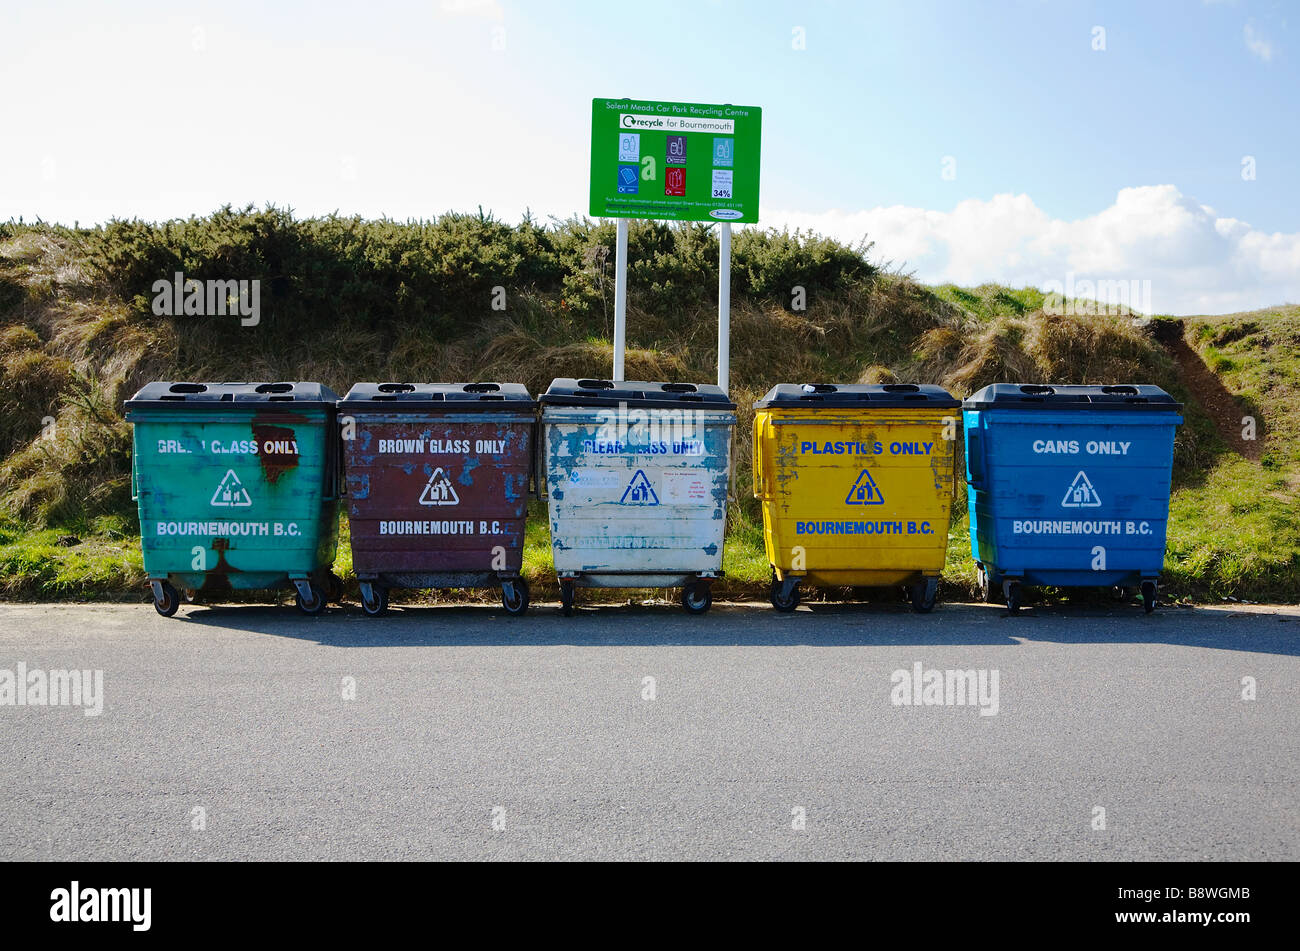 Bournemouth Council, Solent Meads Recycling Centre. Bournemouth, Dorset. UK. Row of five bins for glass, plastic and cans. Stock Photo